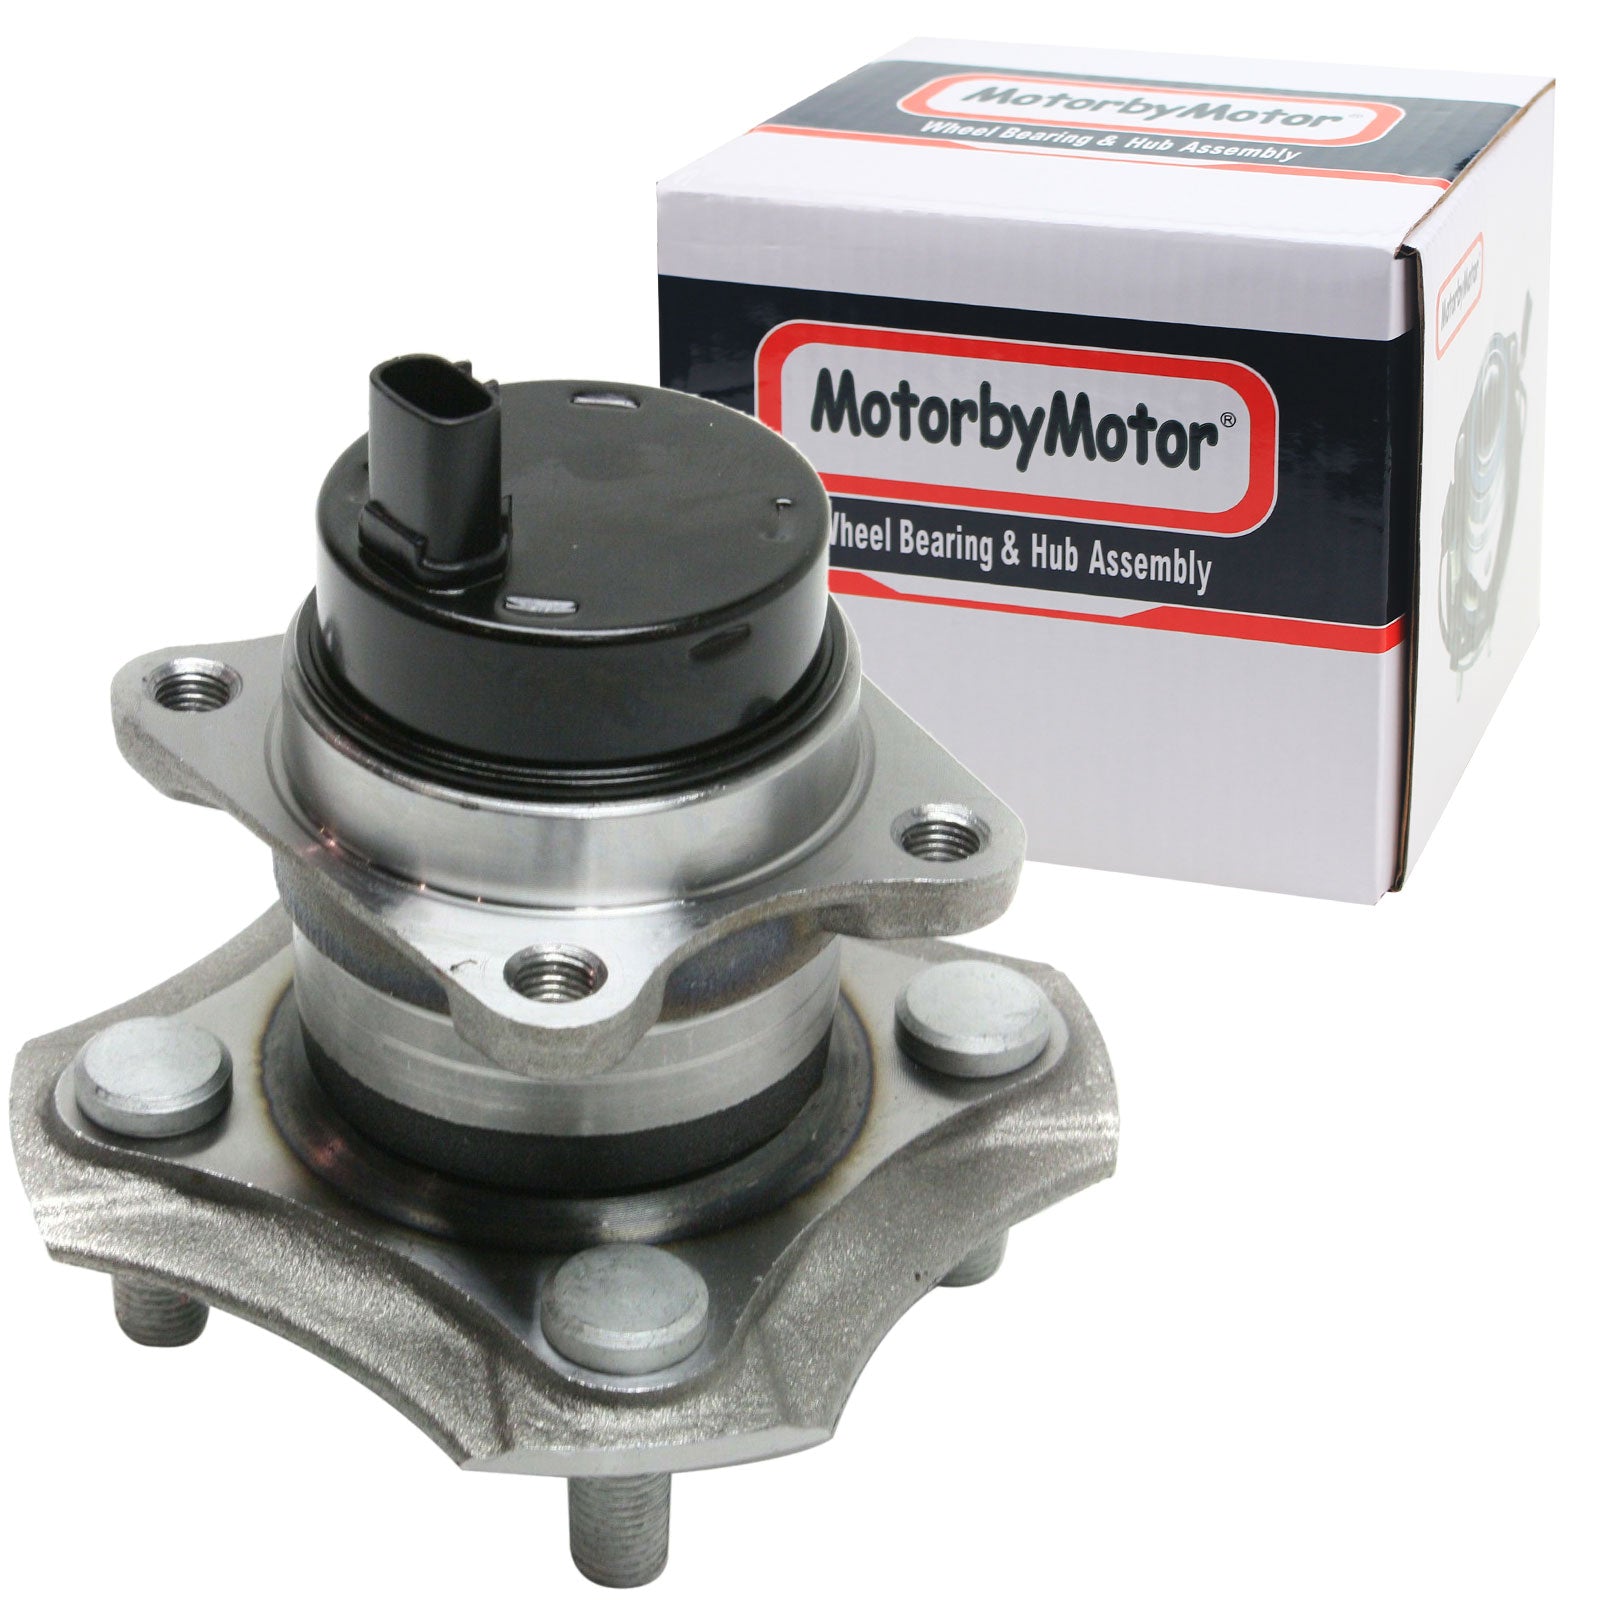 MotorbyMotor 512209 Rear Wheel Bearing Hub Assembly with 4 Lugs Scion XA XB 2004-2006, Toyota Echo 2000-2005 Low-Runout OE Directly Replacement (w/ABS) MotorbyMotor